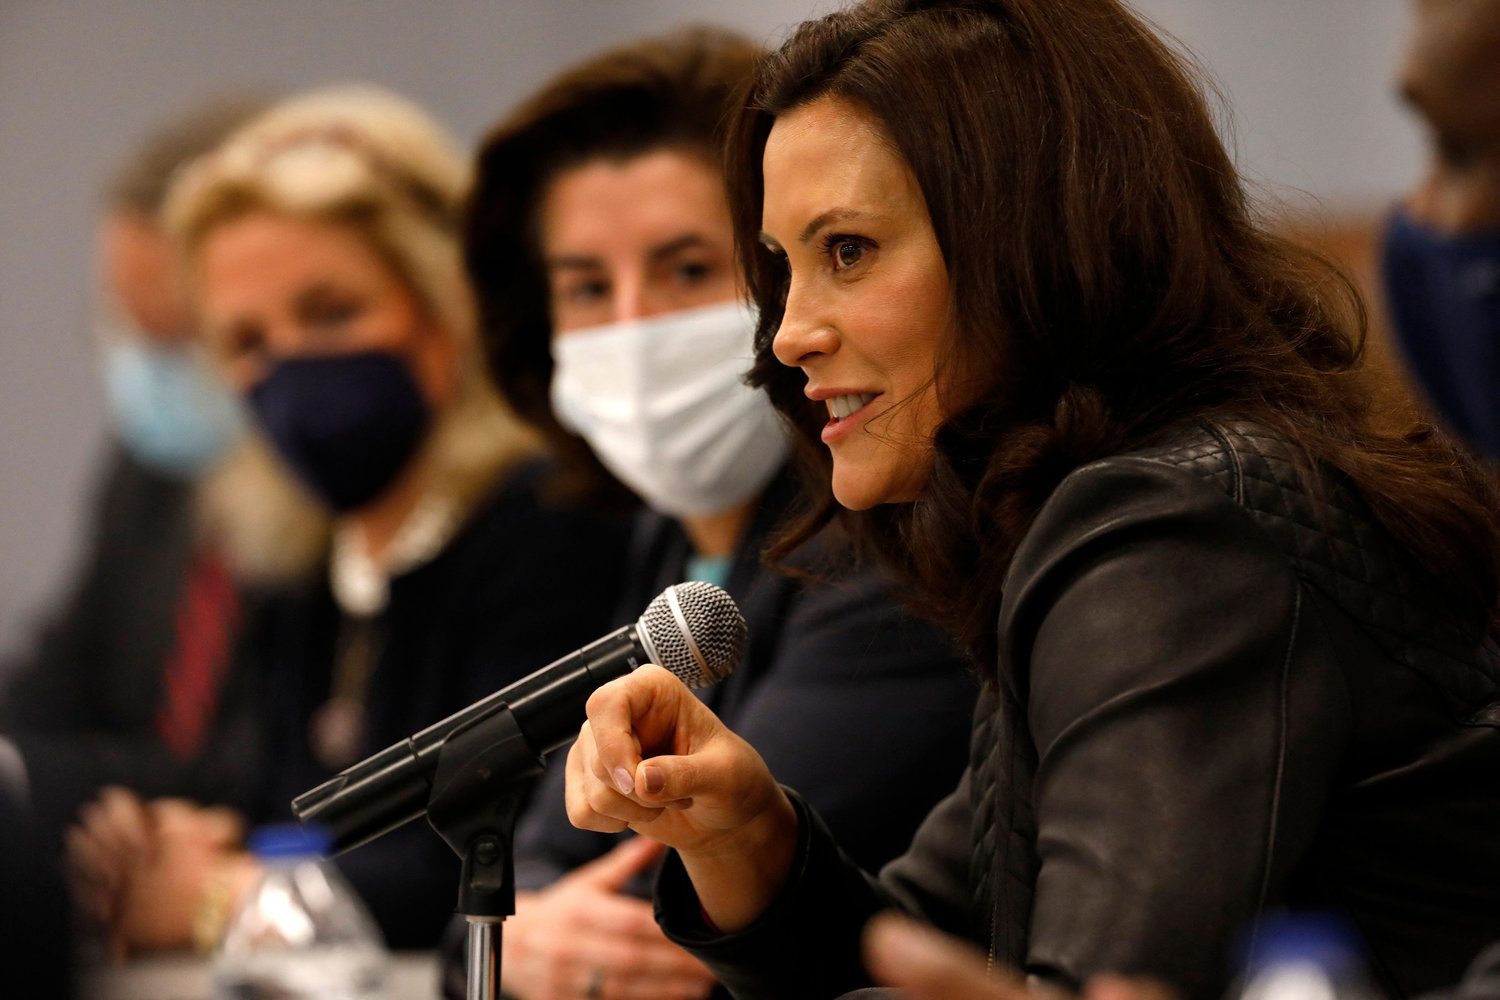 In this file photo, Michigan Governor Gretchen Whitmer speaks at a roundtable with U.S. Commerce Secretary Gina Raimondo in Taylor, Michigan, on Nov. 29, 2021. (Jeff Kowalsky/AFP/Getty Images/TNS)